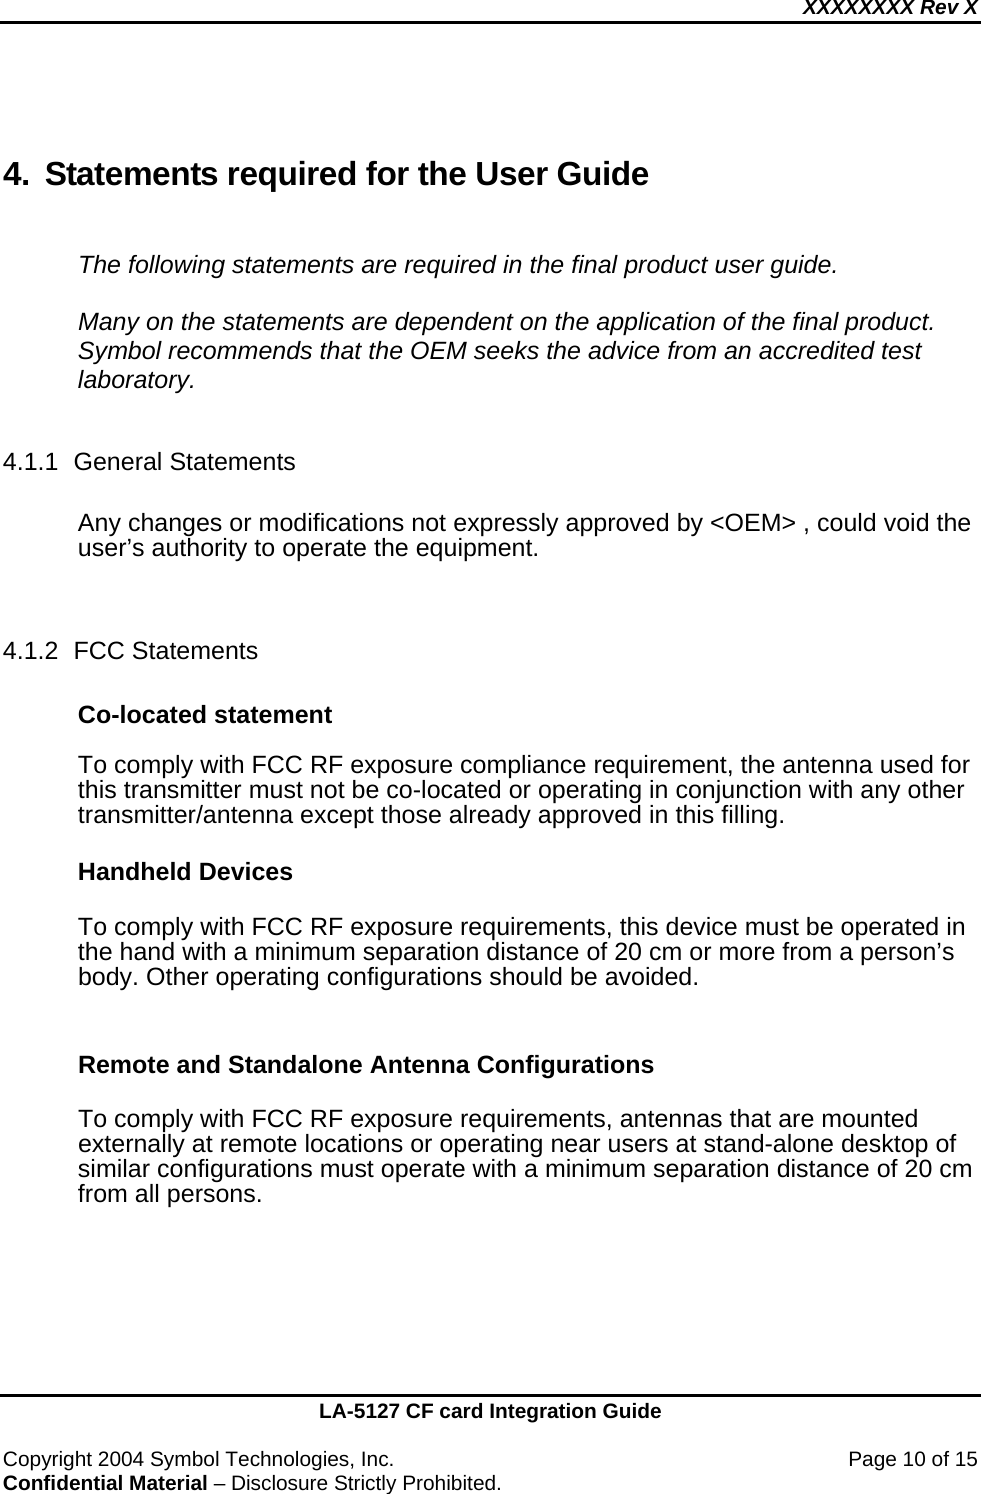 XXXXXXXX Rev X    LA-5127 CF card Integration Guide  Copyright 2004 Symbol Technologies, Inc.    Page 10 of 15 Confidential Material – Disclosure Strictly Prohibited.  4.  Statements required for the User Guide  The following statements are required in the final product user guide.  Many on the statements are dependent on the application of the final product.  Symbol recommends that the OEM seeks the advice from an accredited test laboratory.  4.1.1 General Statements  Any changes or modifications not expressly approved by &lt;OEM&gt; , could void the user’s authority to operate the equipment.   4.1.2 FCC Statements  Co-located statement  To comply with FCC RF exposure compliance requirement, the antenna used for this transmitter must not be co-located or operating in conjunction with any other transmitter/antenna except those already approved in this filling.  Handheld Devices  To comply with FCC RF exposure requirements, this device must be operated in the hand with a minimum separation distance of 20 cm or more from a person’s body. Other operating configurations should be avoided.  Remote and Standalone Antenna Configurations  To comply with FCC RF exposure requirements, antennas that are mounted externally at remote locations or operating near users at stand-alone desktop of similar configurations must operate with a minimum separation distance of 20 cm from all persons.    